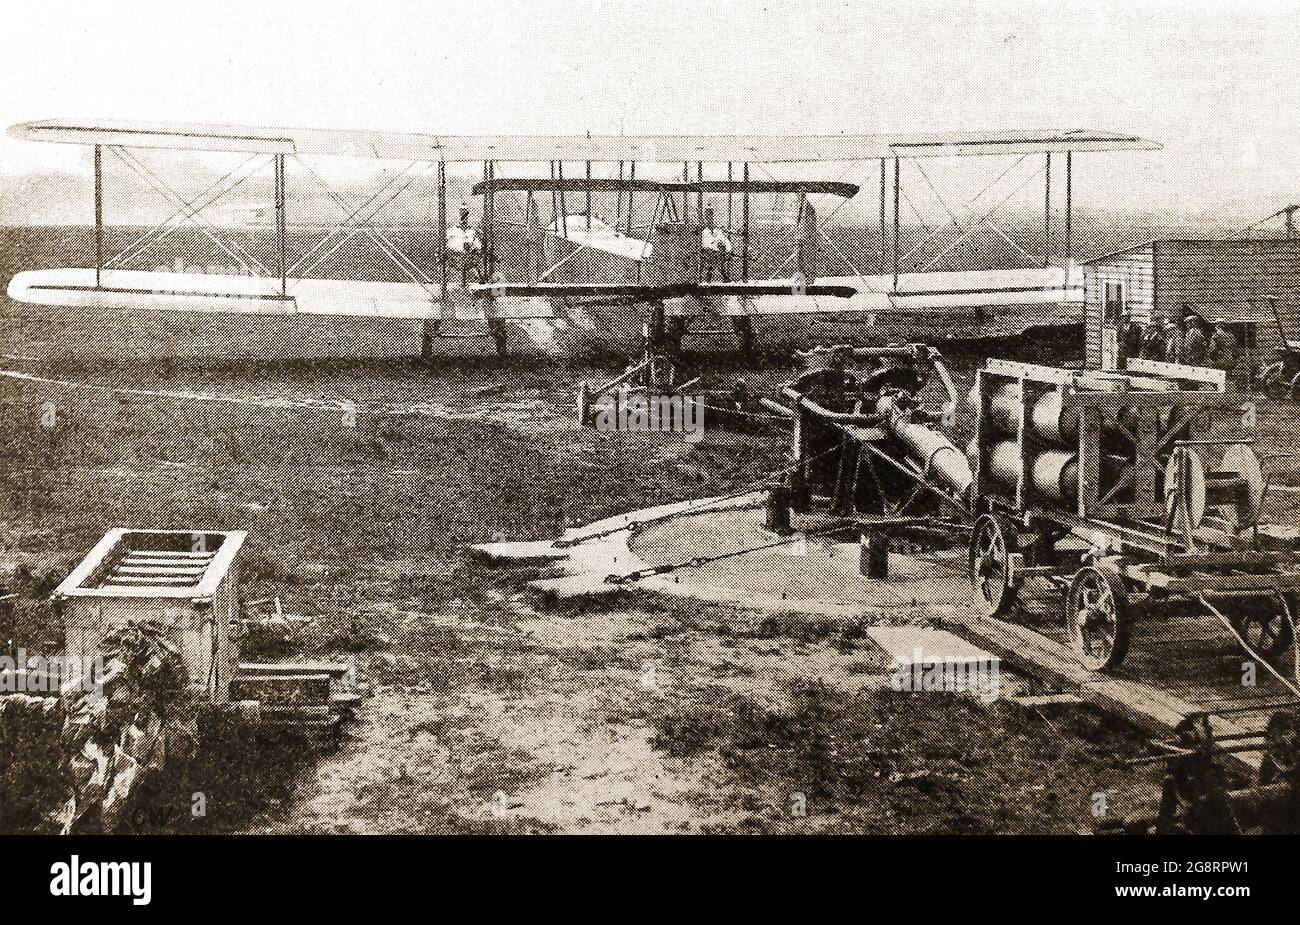 An early printed photograph of an early British  steam-powered  experimental machine for catapulting aircraft into the air. Germany first used seaplane steam engines to launch their Dornier Do J mail planes on their South Atlantic Air Mail service in  1933. Modern British invented  steam catapults  to launch aircraft air was suggested by Commander Colin C. Mitchell RNVR. Soon trials took place  on HMS Perseus in 1950 . Pilots included Eric 'Winkle' Brown.. Navies introduced steam catapults for jet fighters soon after. Stock Photo